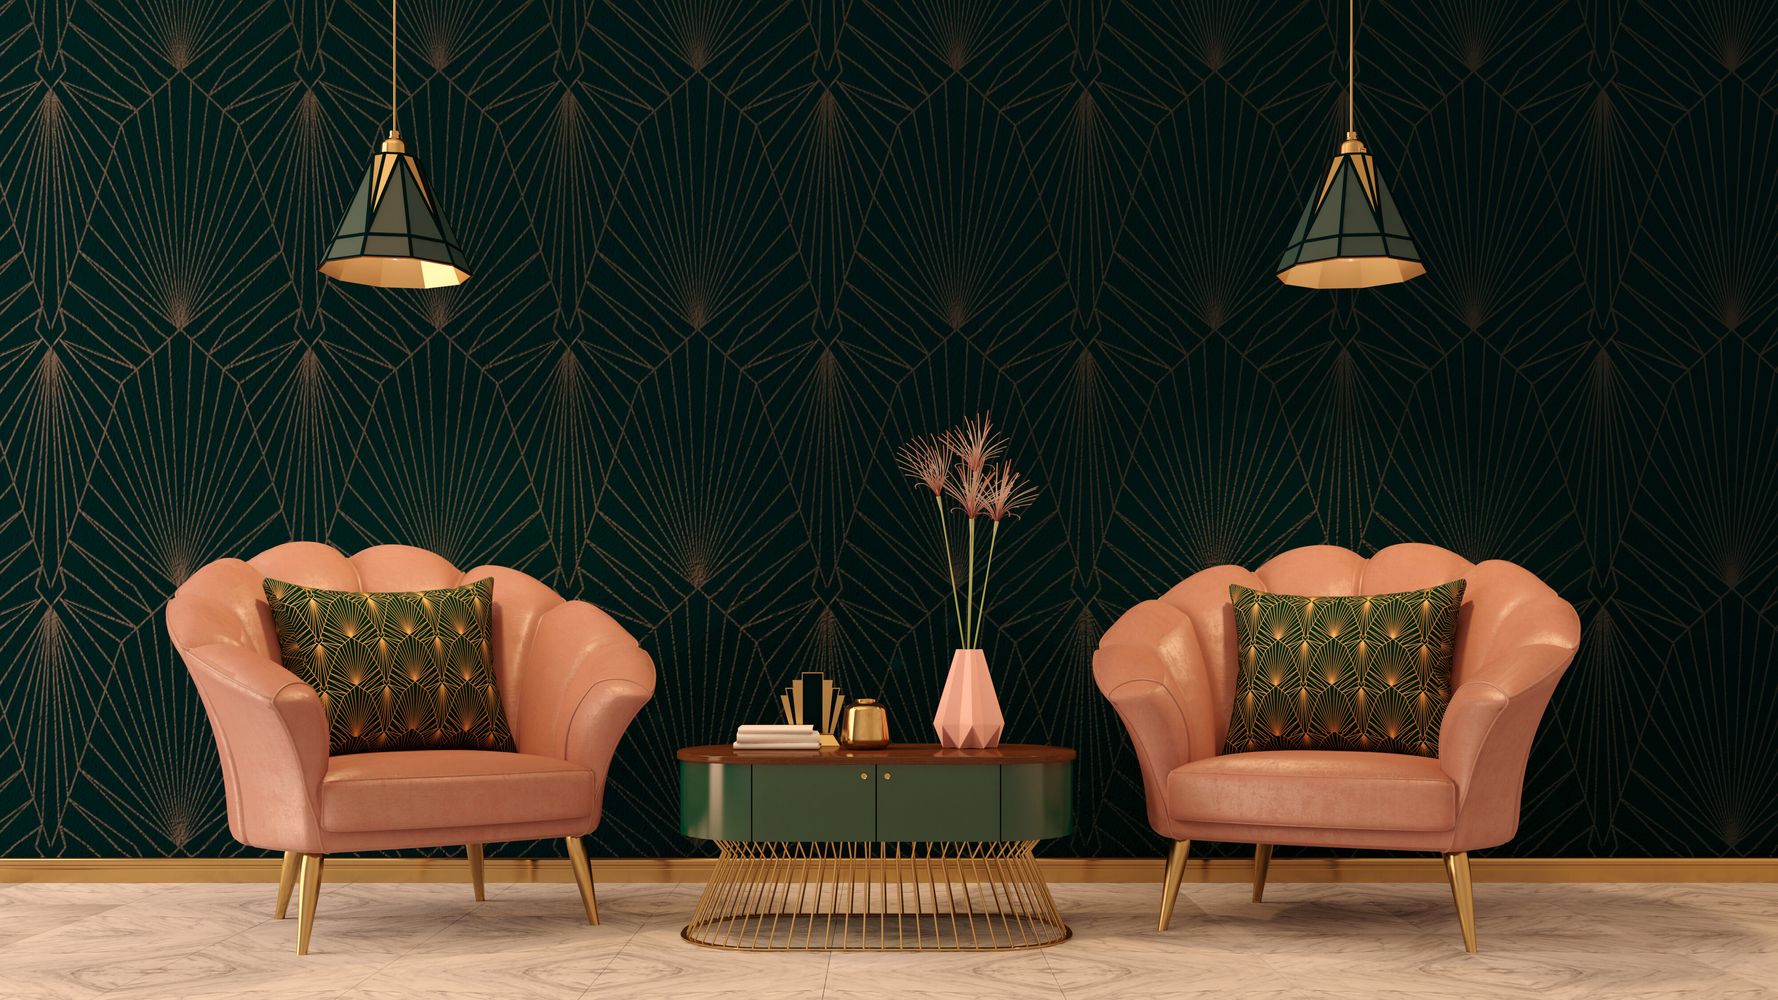 Where To Buy Art Deco-Inspired Furniture And Decor Online On A Budget |  HuffPost Life